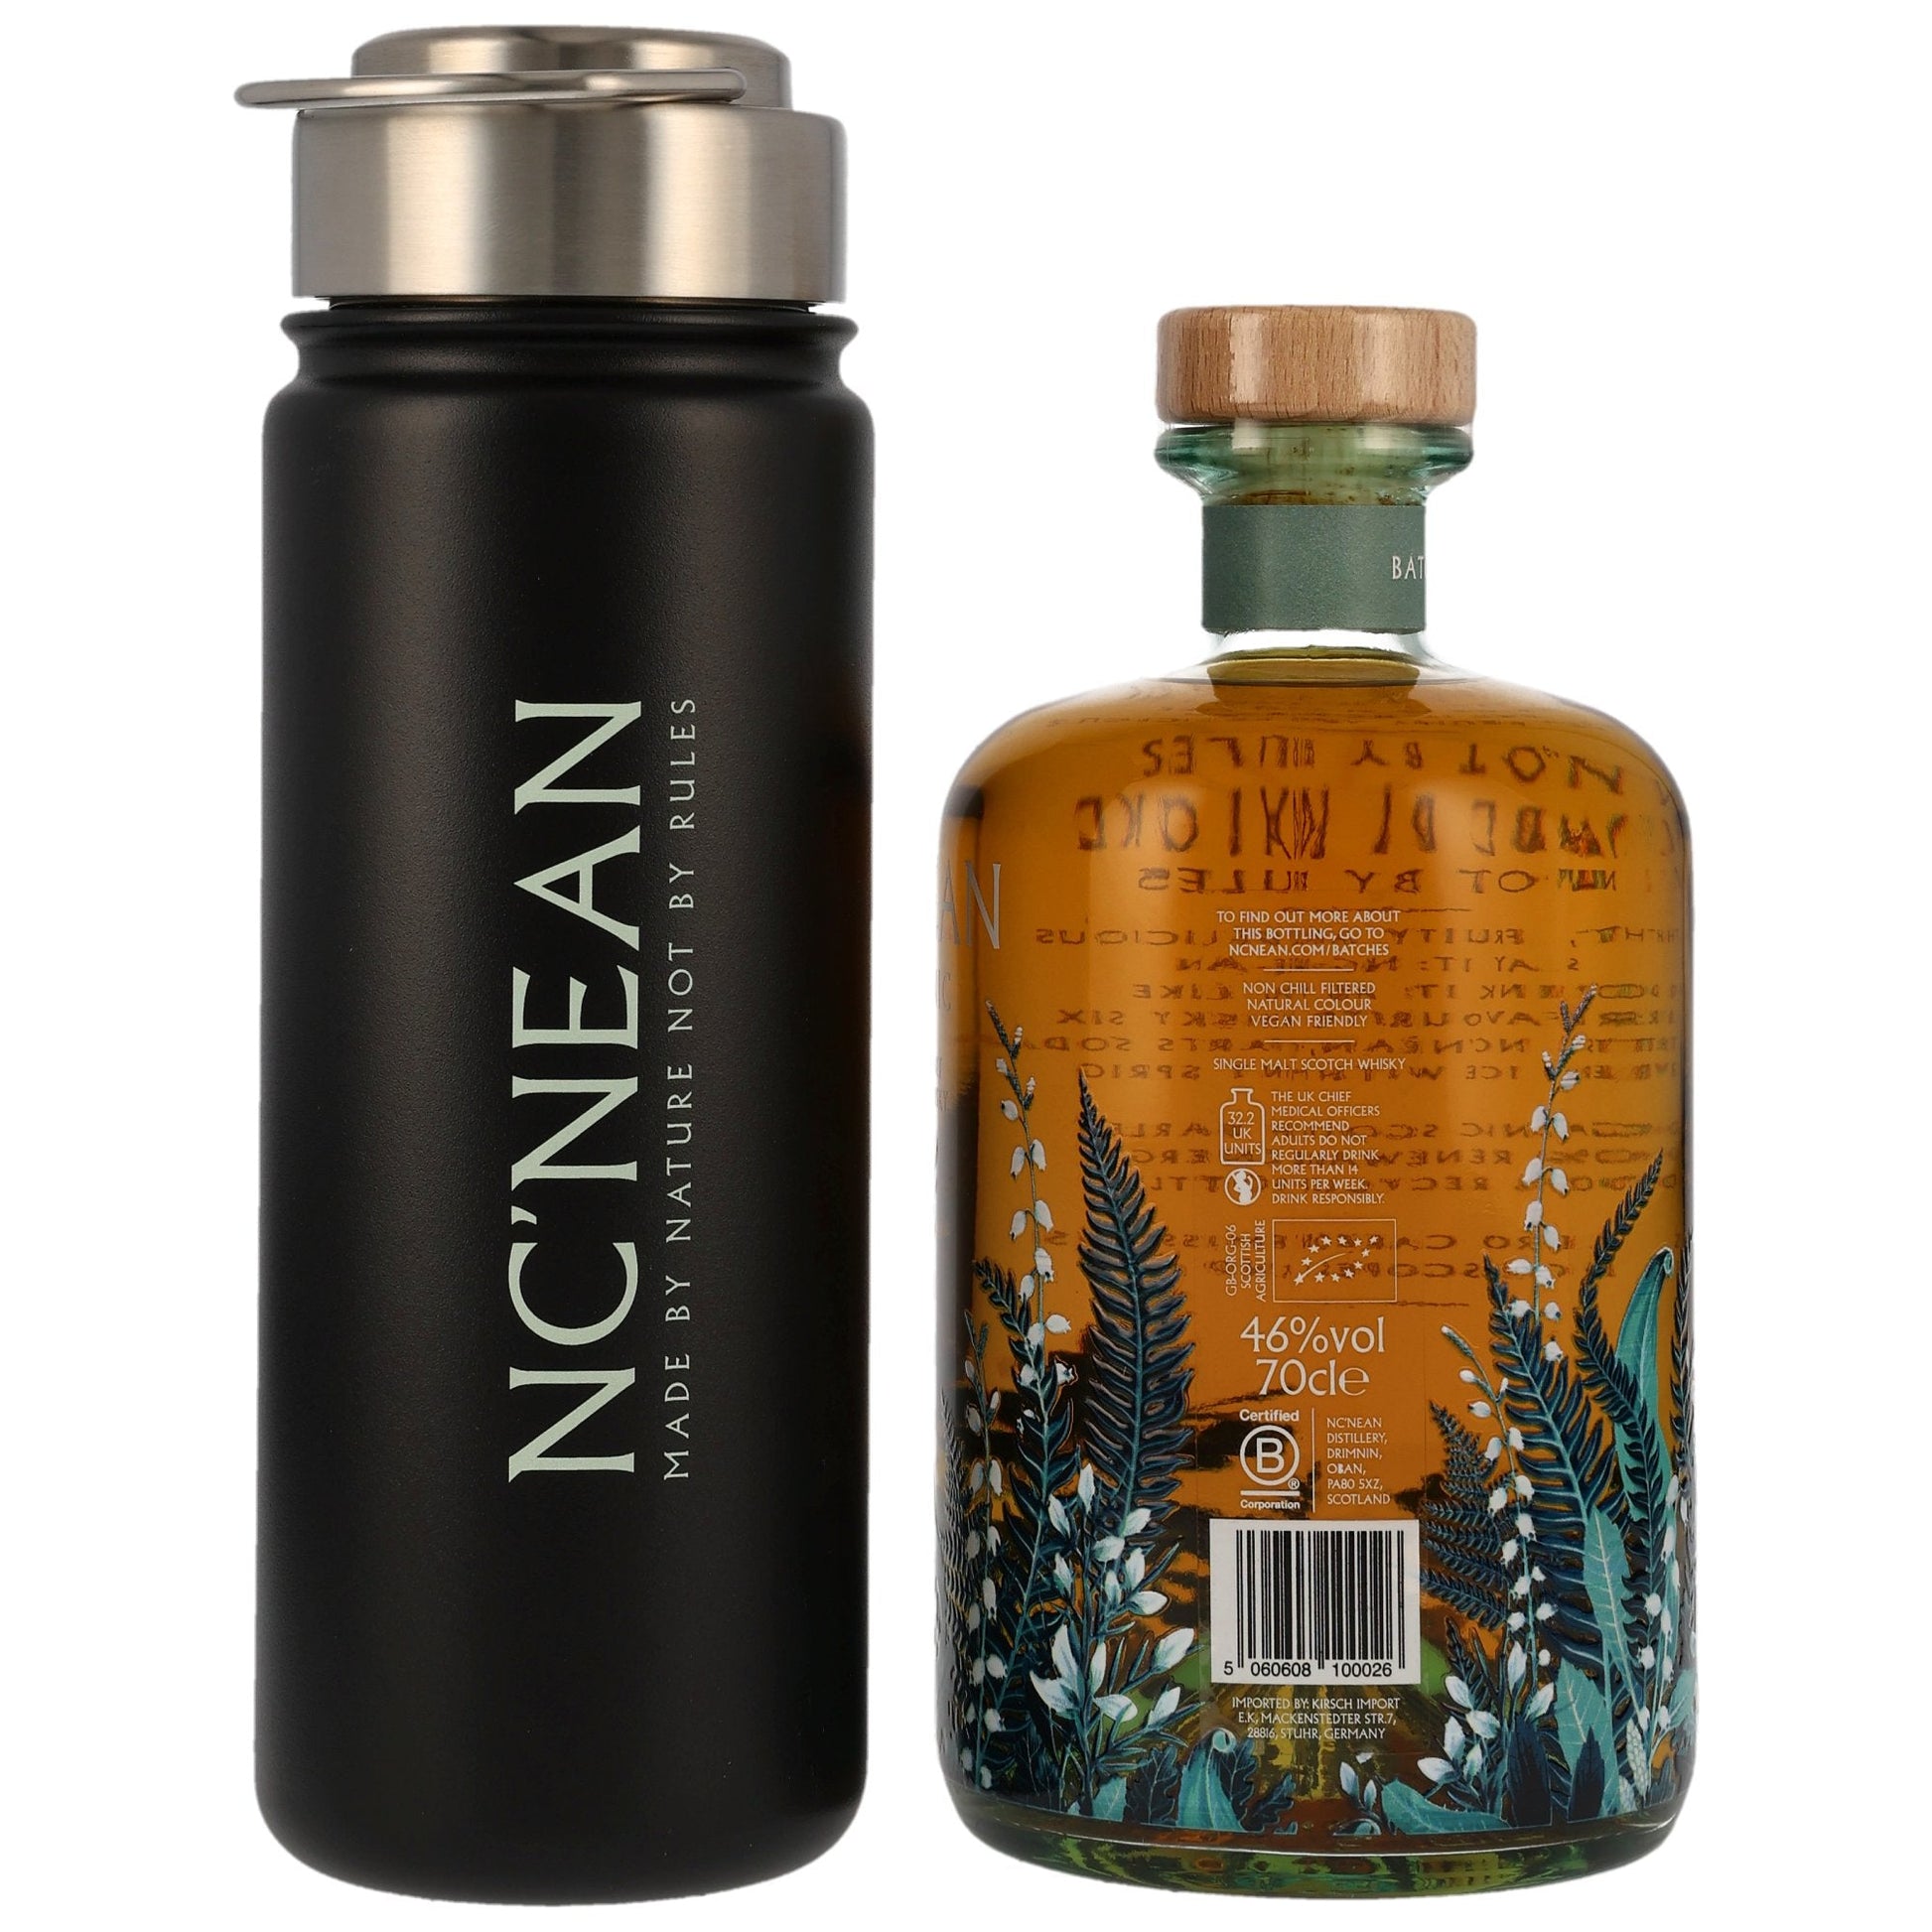 Nc'Nean Hot Toddy Set | Nc'Nean Whisky + Thermo-Trinkflasche | 46%GET A BOTTLE